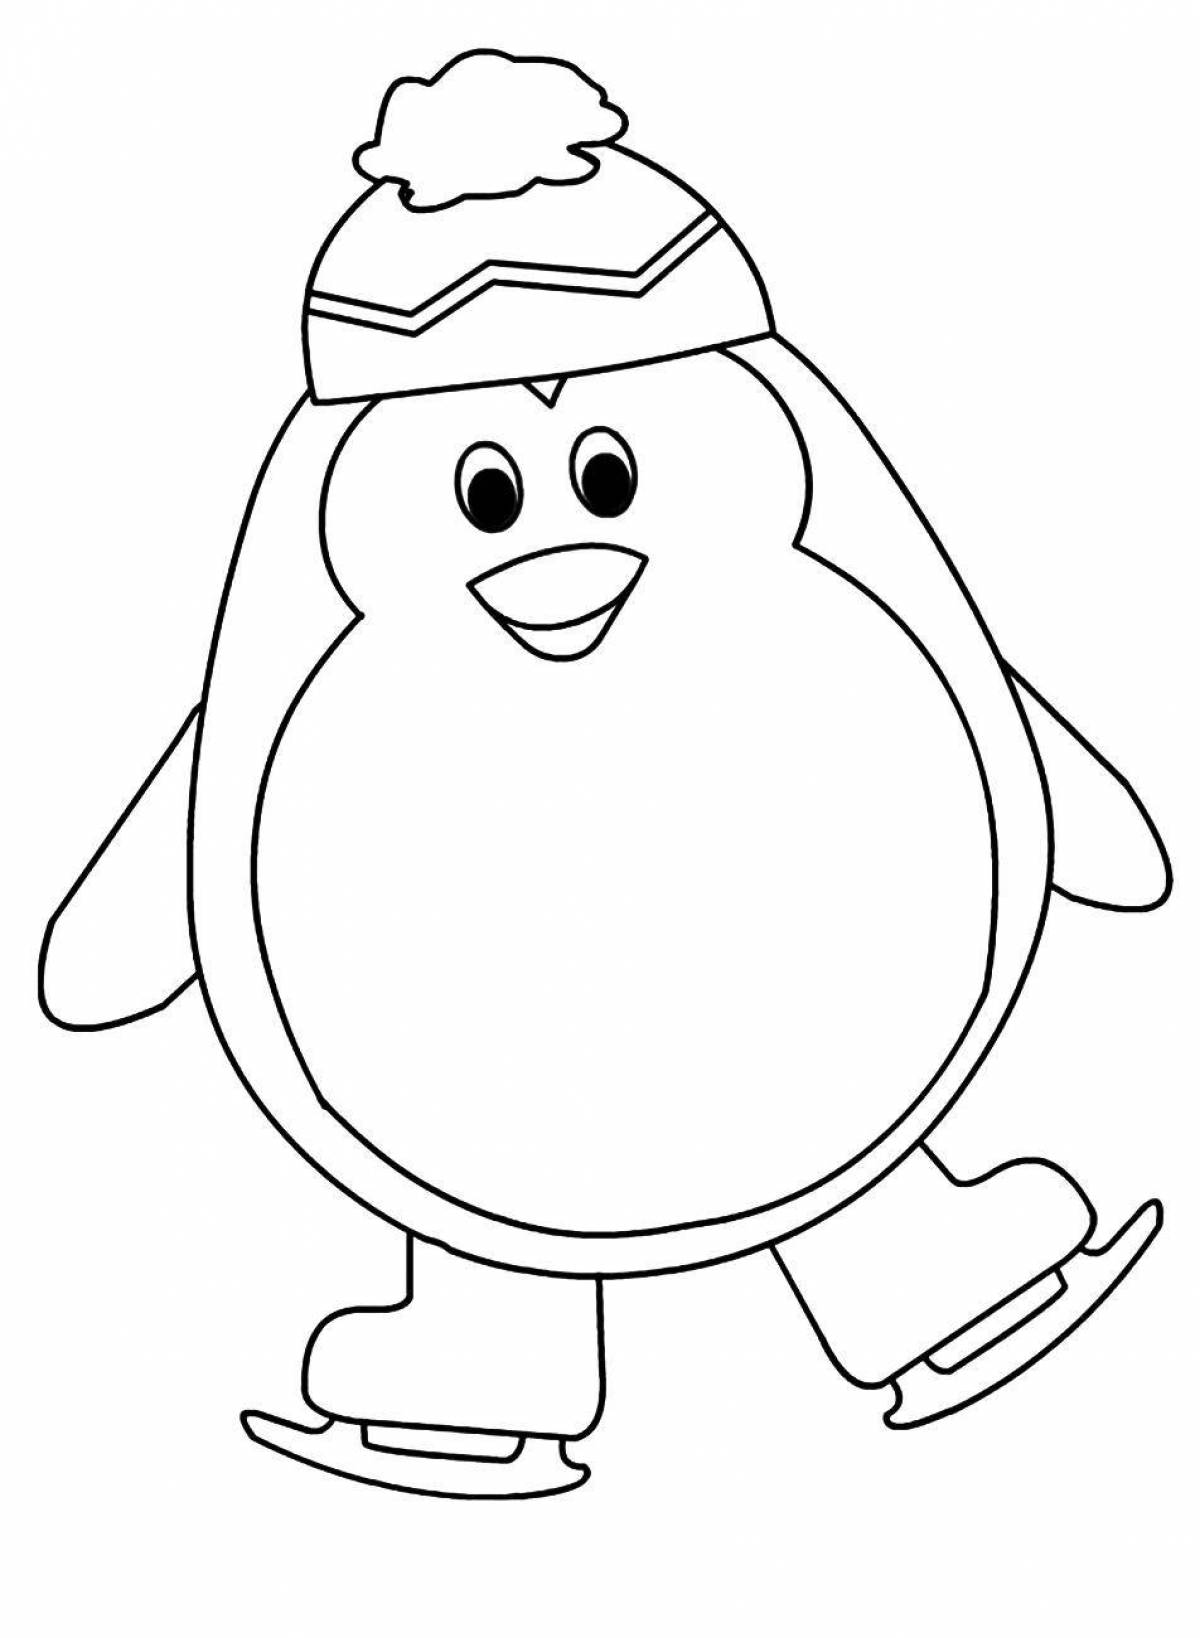 Coloring penguin with a bright pattern